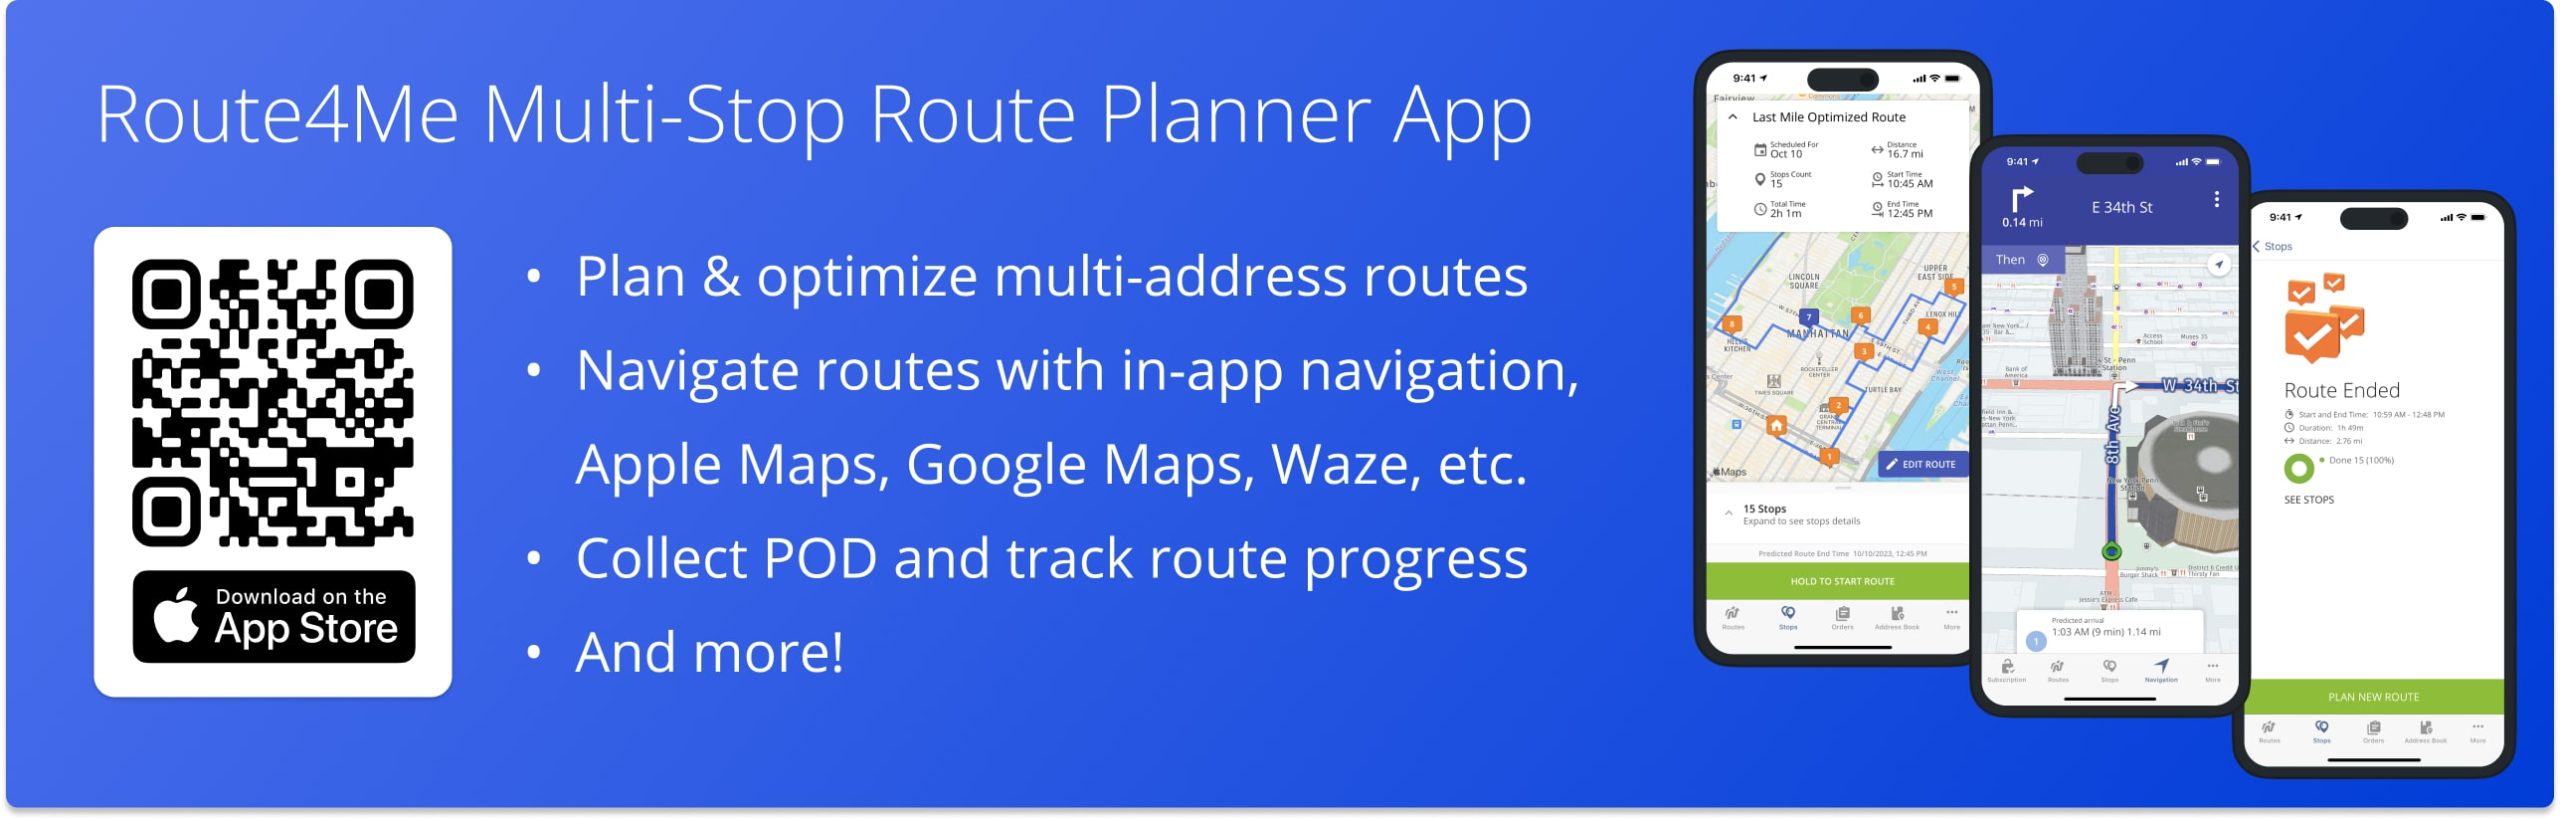 Download Route4Me multi-stop route planner app with in-app route navigation.